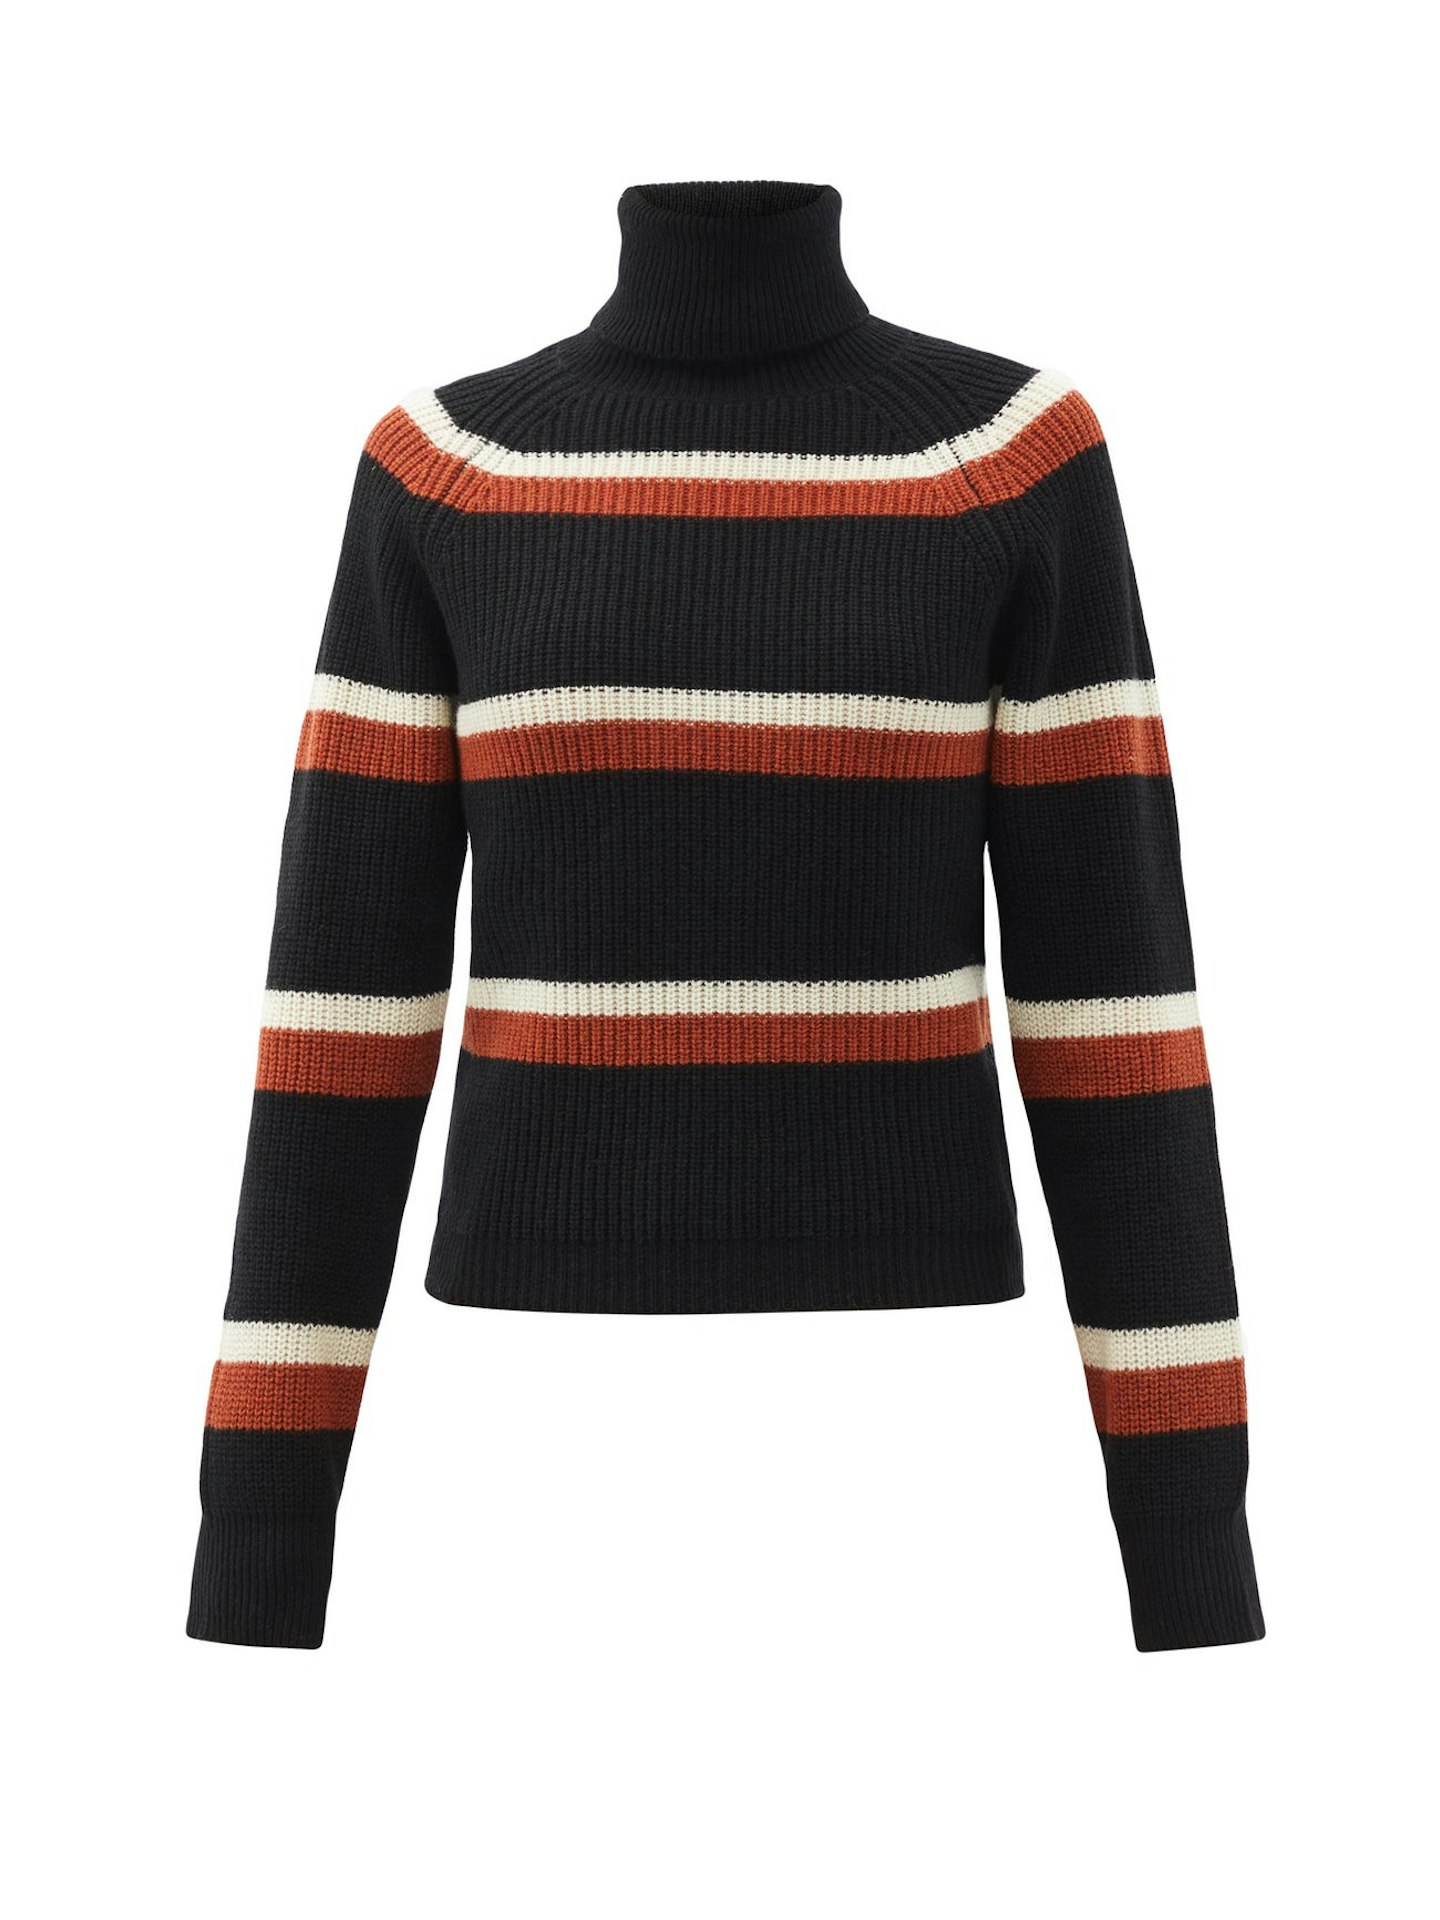 Marni, Roll-neck intarsia-striped ribbed-wool sweater, WAS £590 NOW £442.50